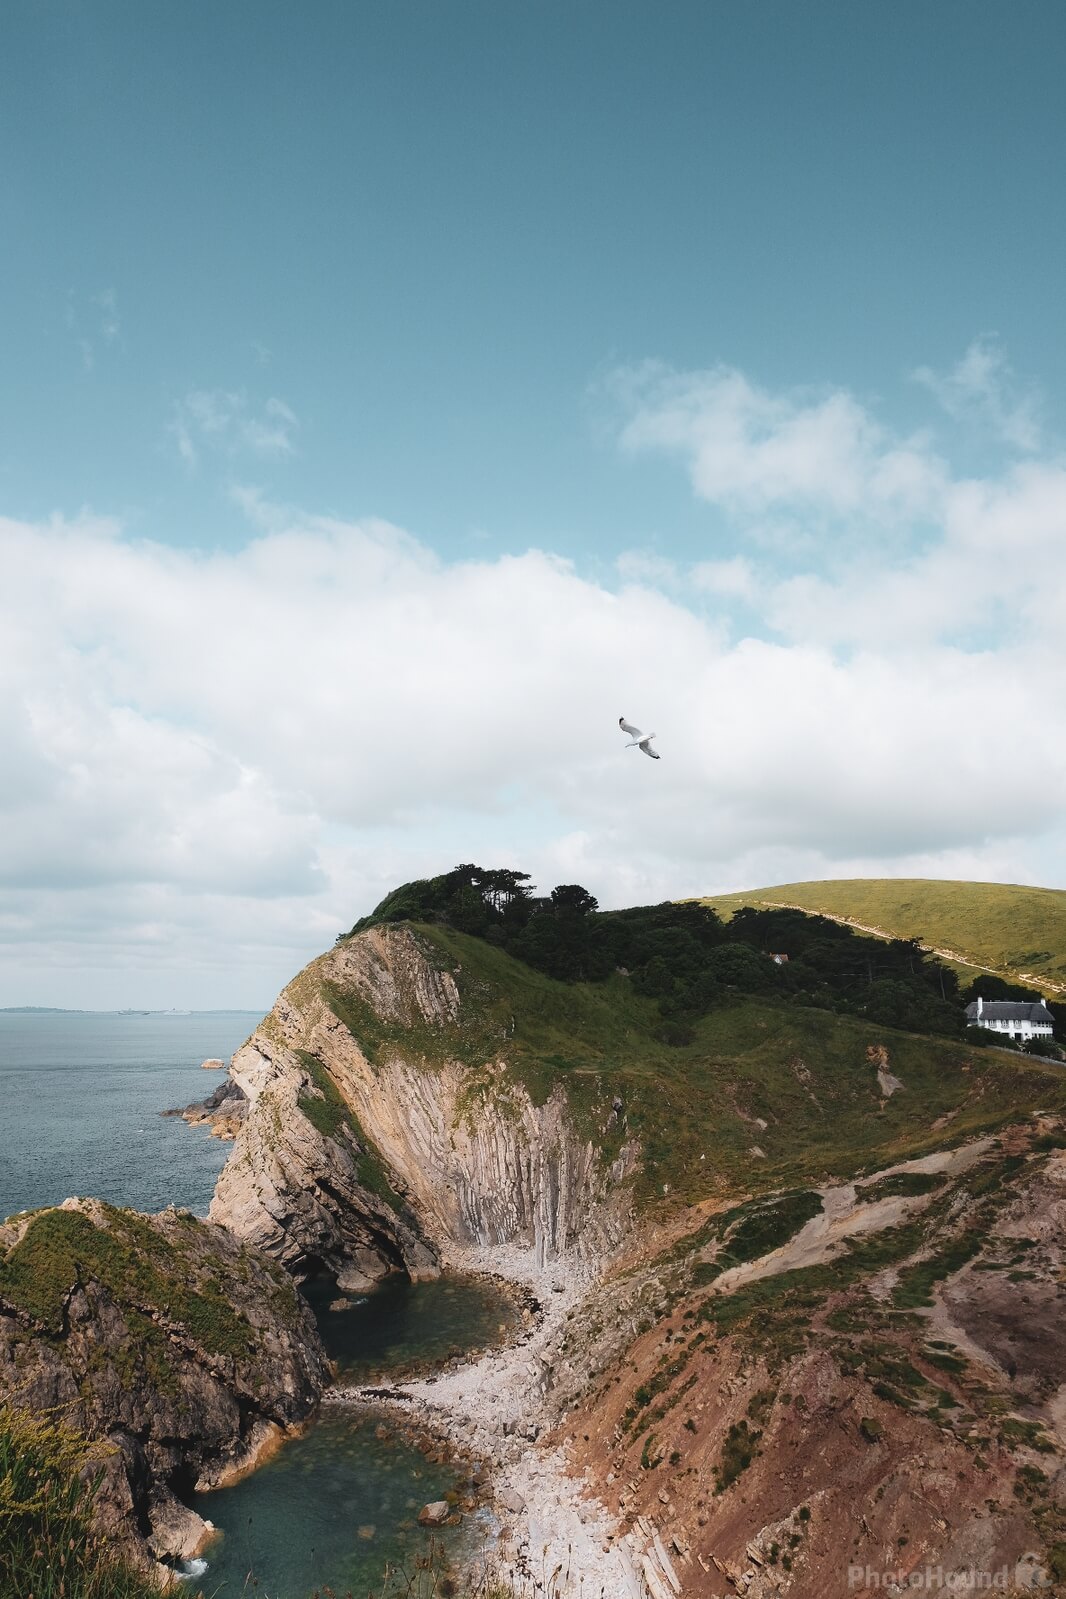 Image of Lulworth Cove by Jonny Brown